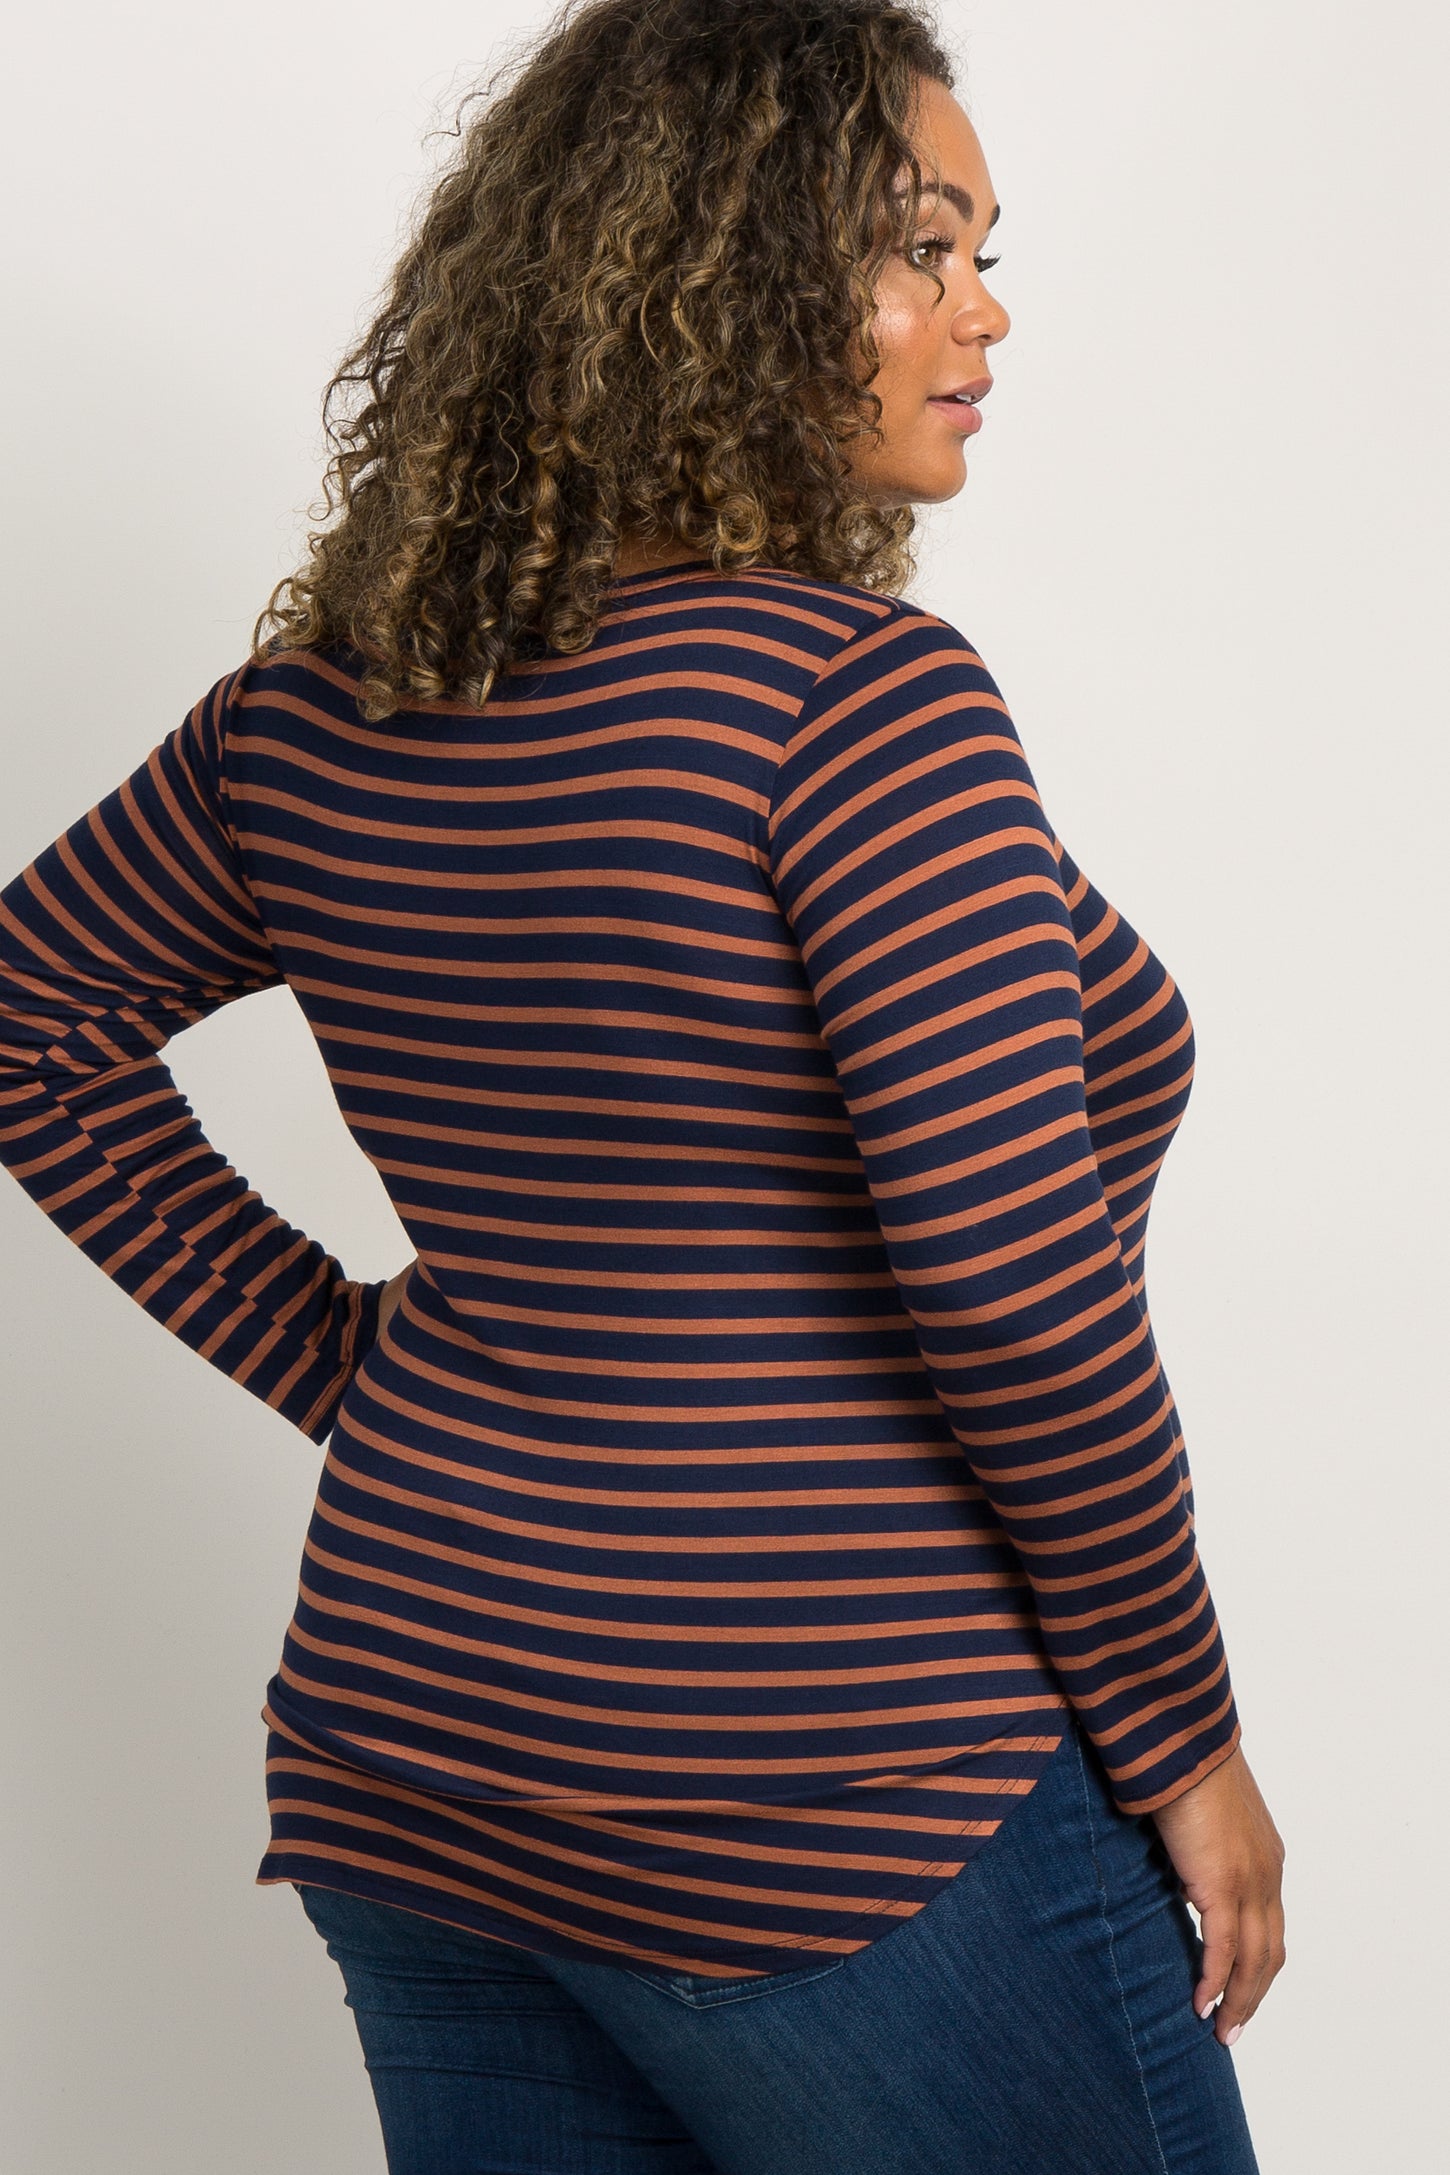 Rust Striped Long Sleeve V-Neck Plus Maternity Top